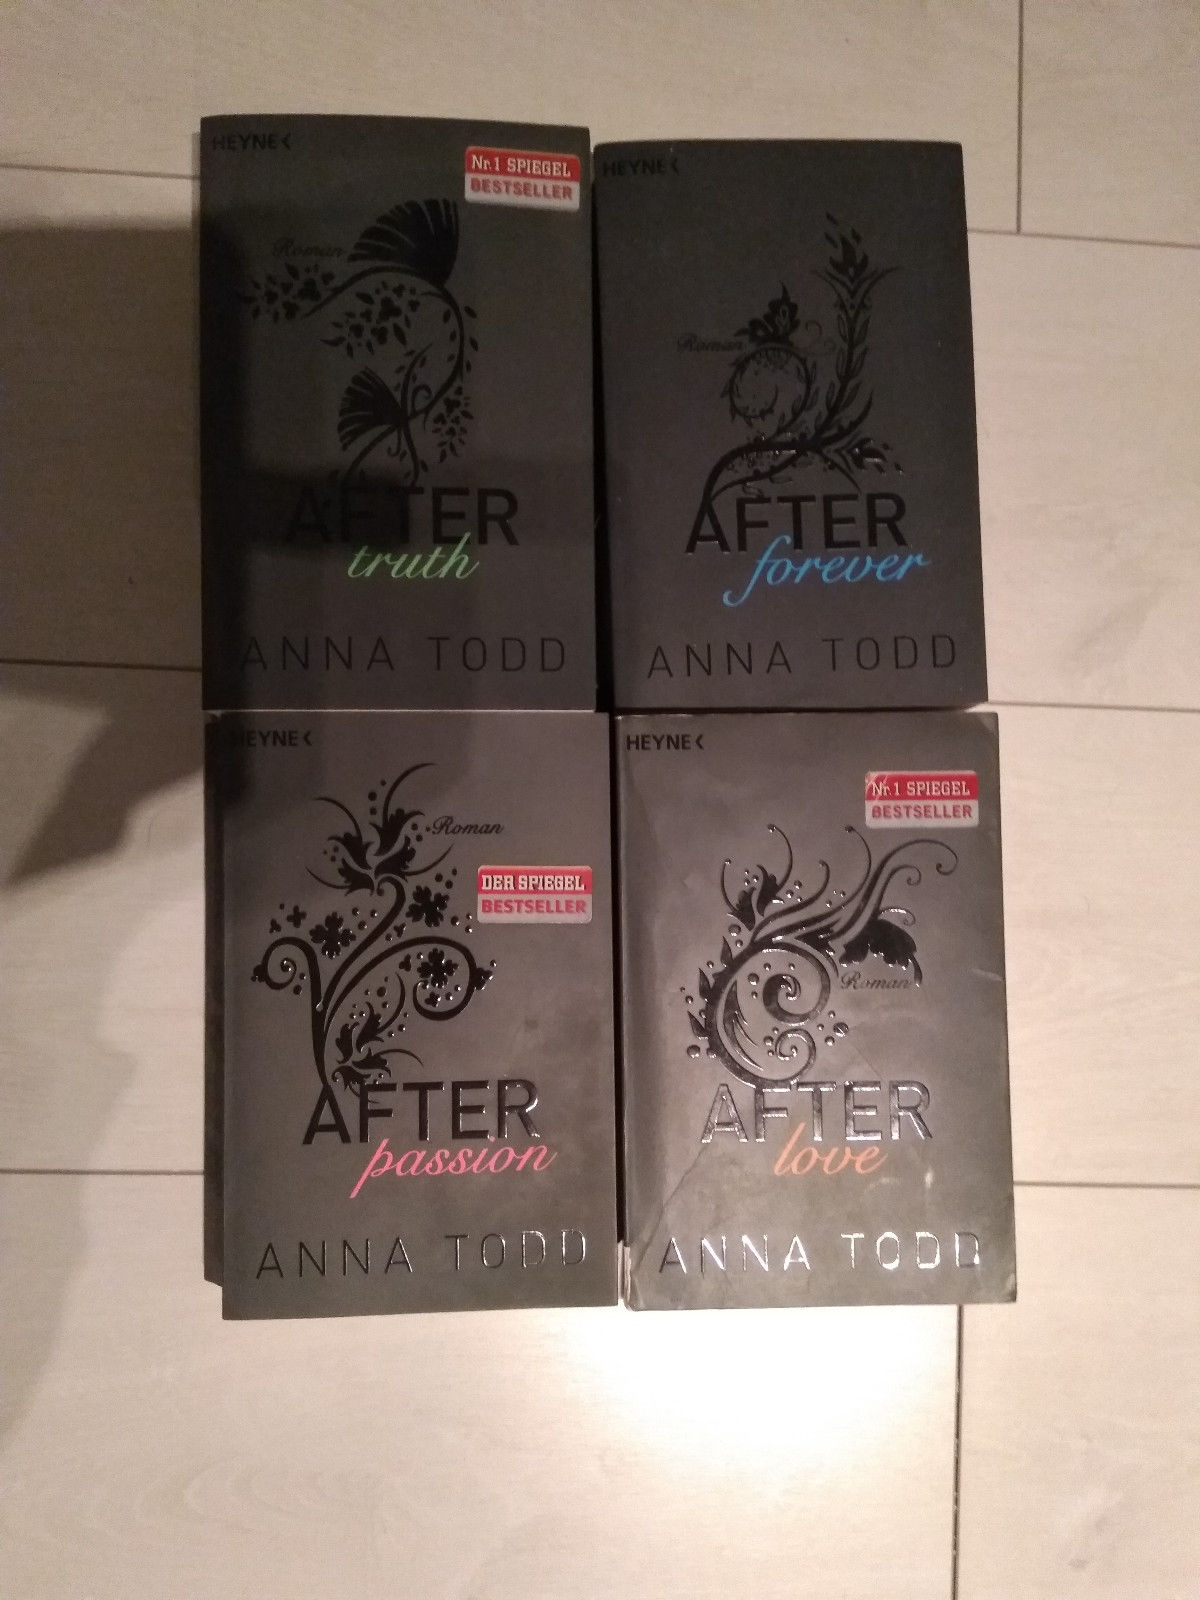 After Buchreihe (truth, forever, passion, love) (Anna Todd)